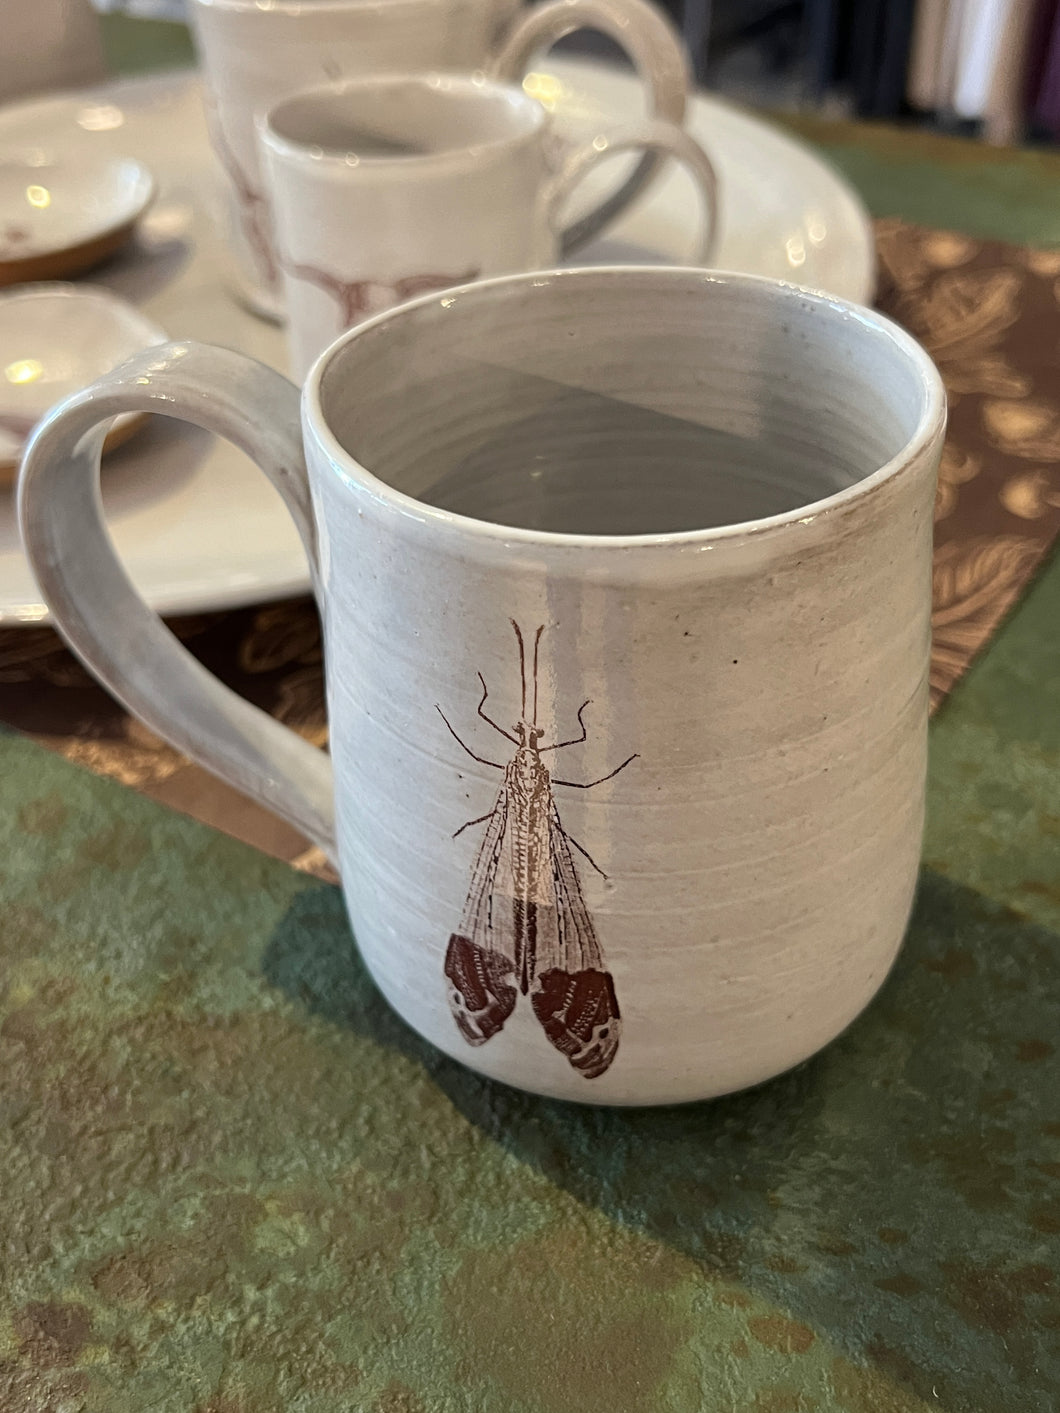 Off white clay mug with image of brown flying bug on front sitting on green metal table